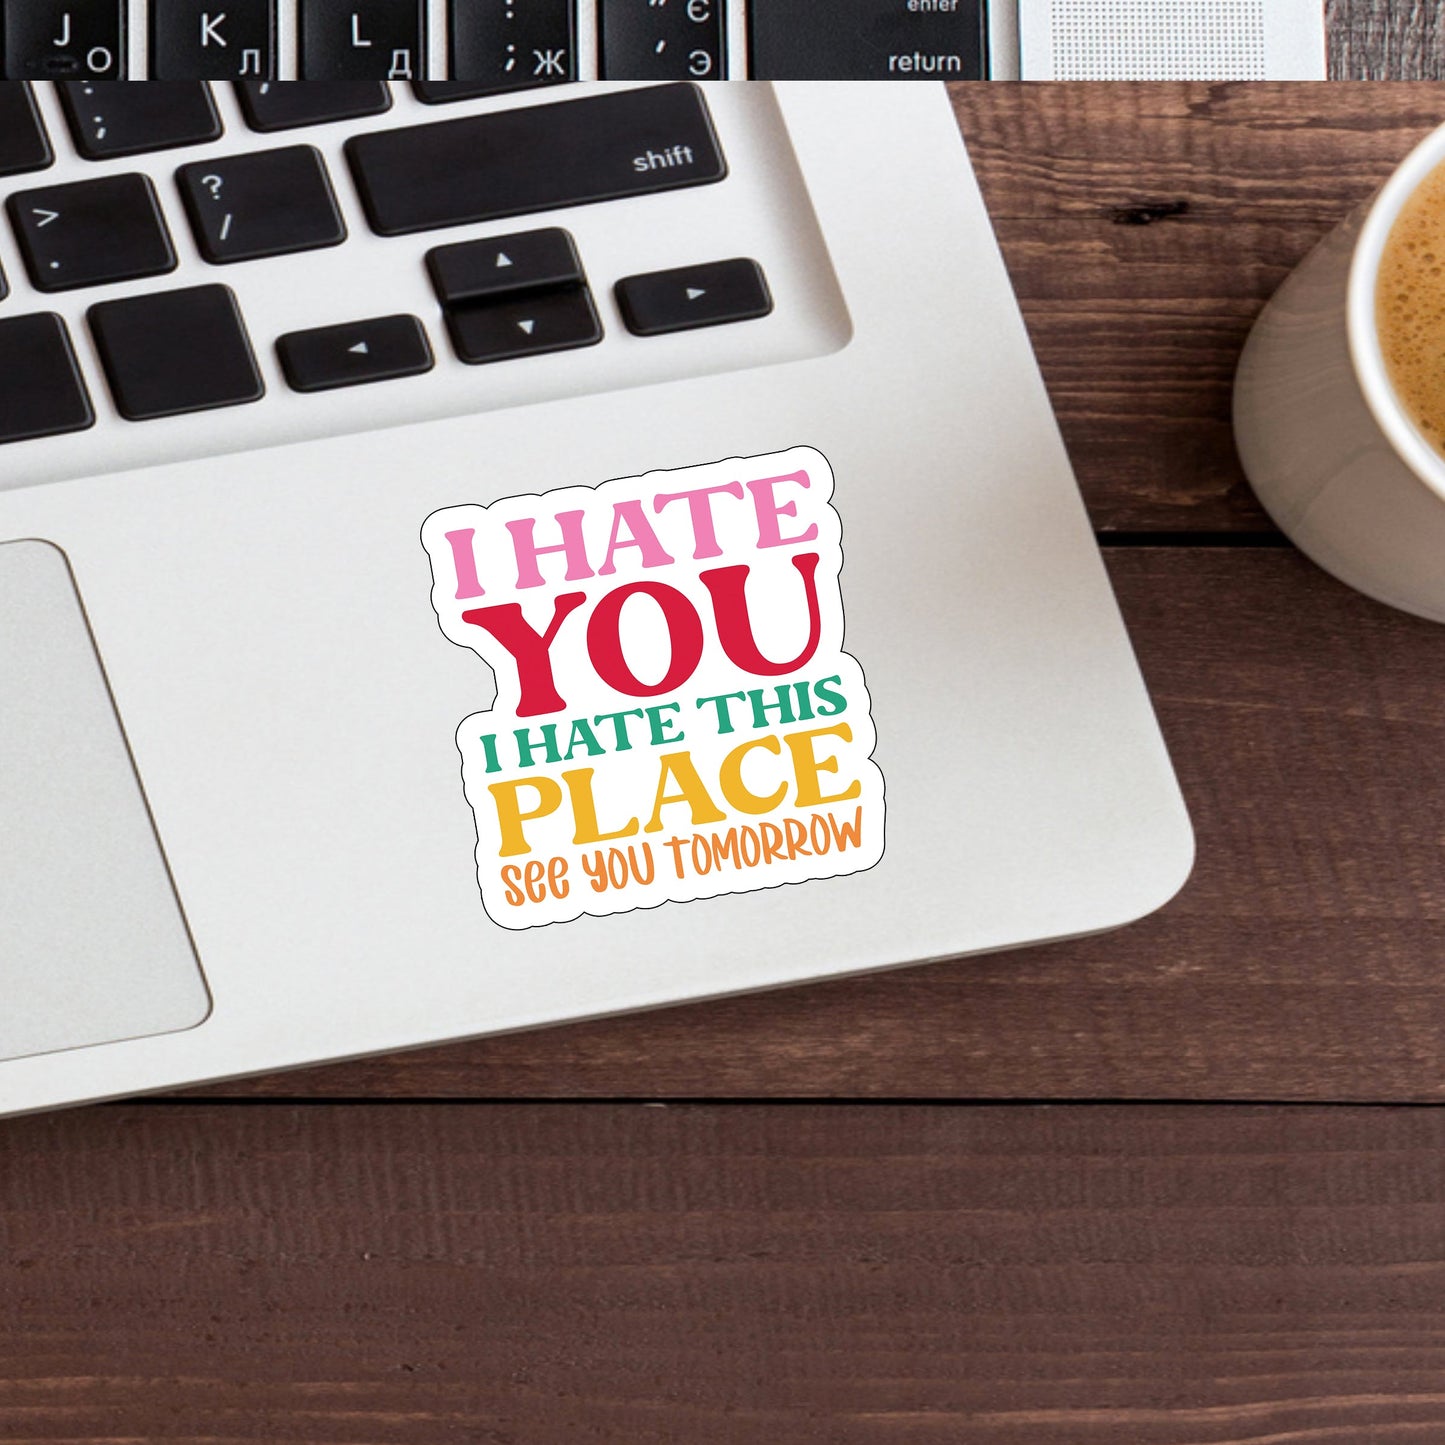 I hate you I hate this place see you tomorrow  Sticker,  Vinyl sticker, laptop sticker, Tablet sticker